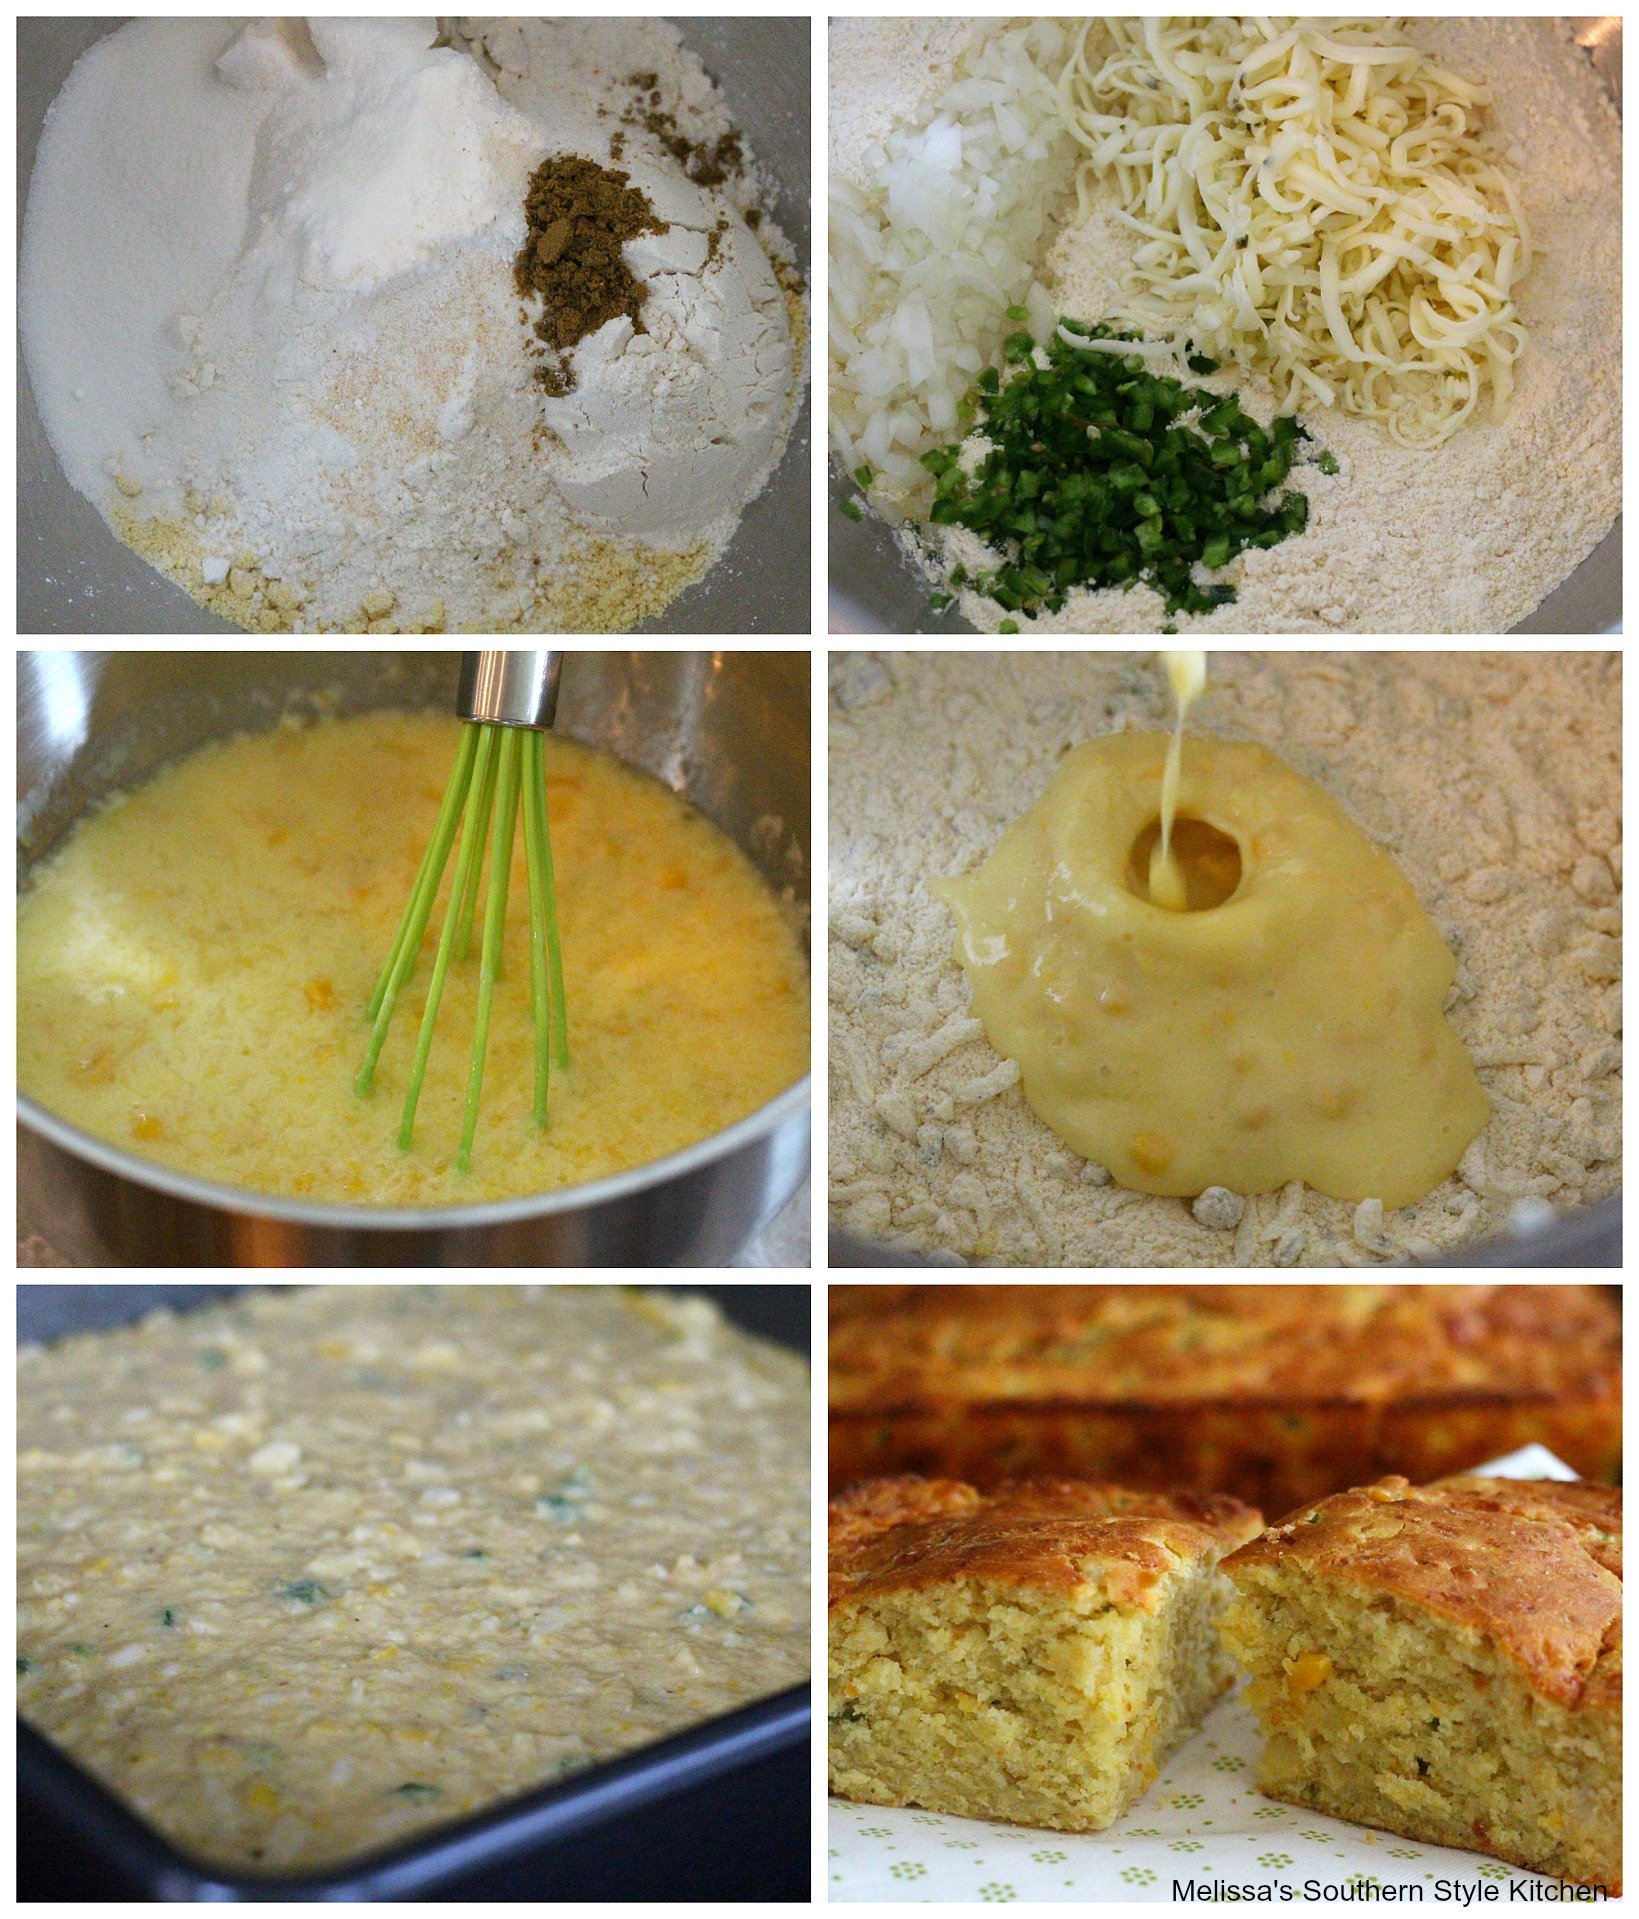 Step by step pictures of preparation of Jalapeno Pepper-Jack Cornbread